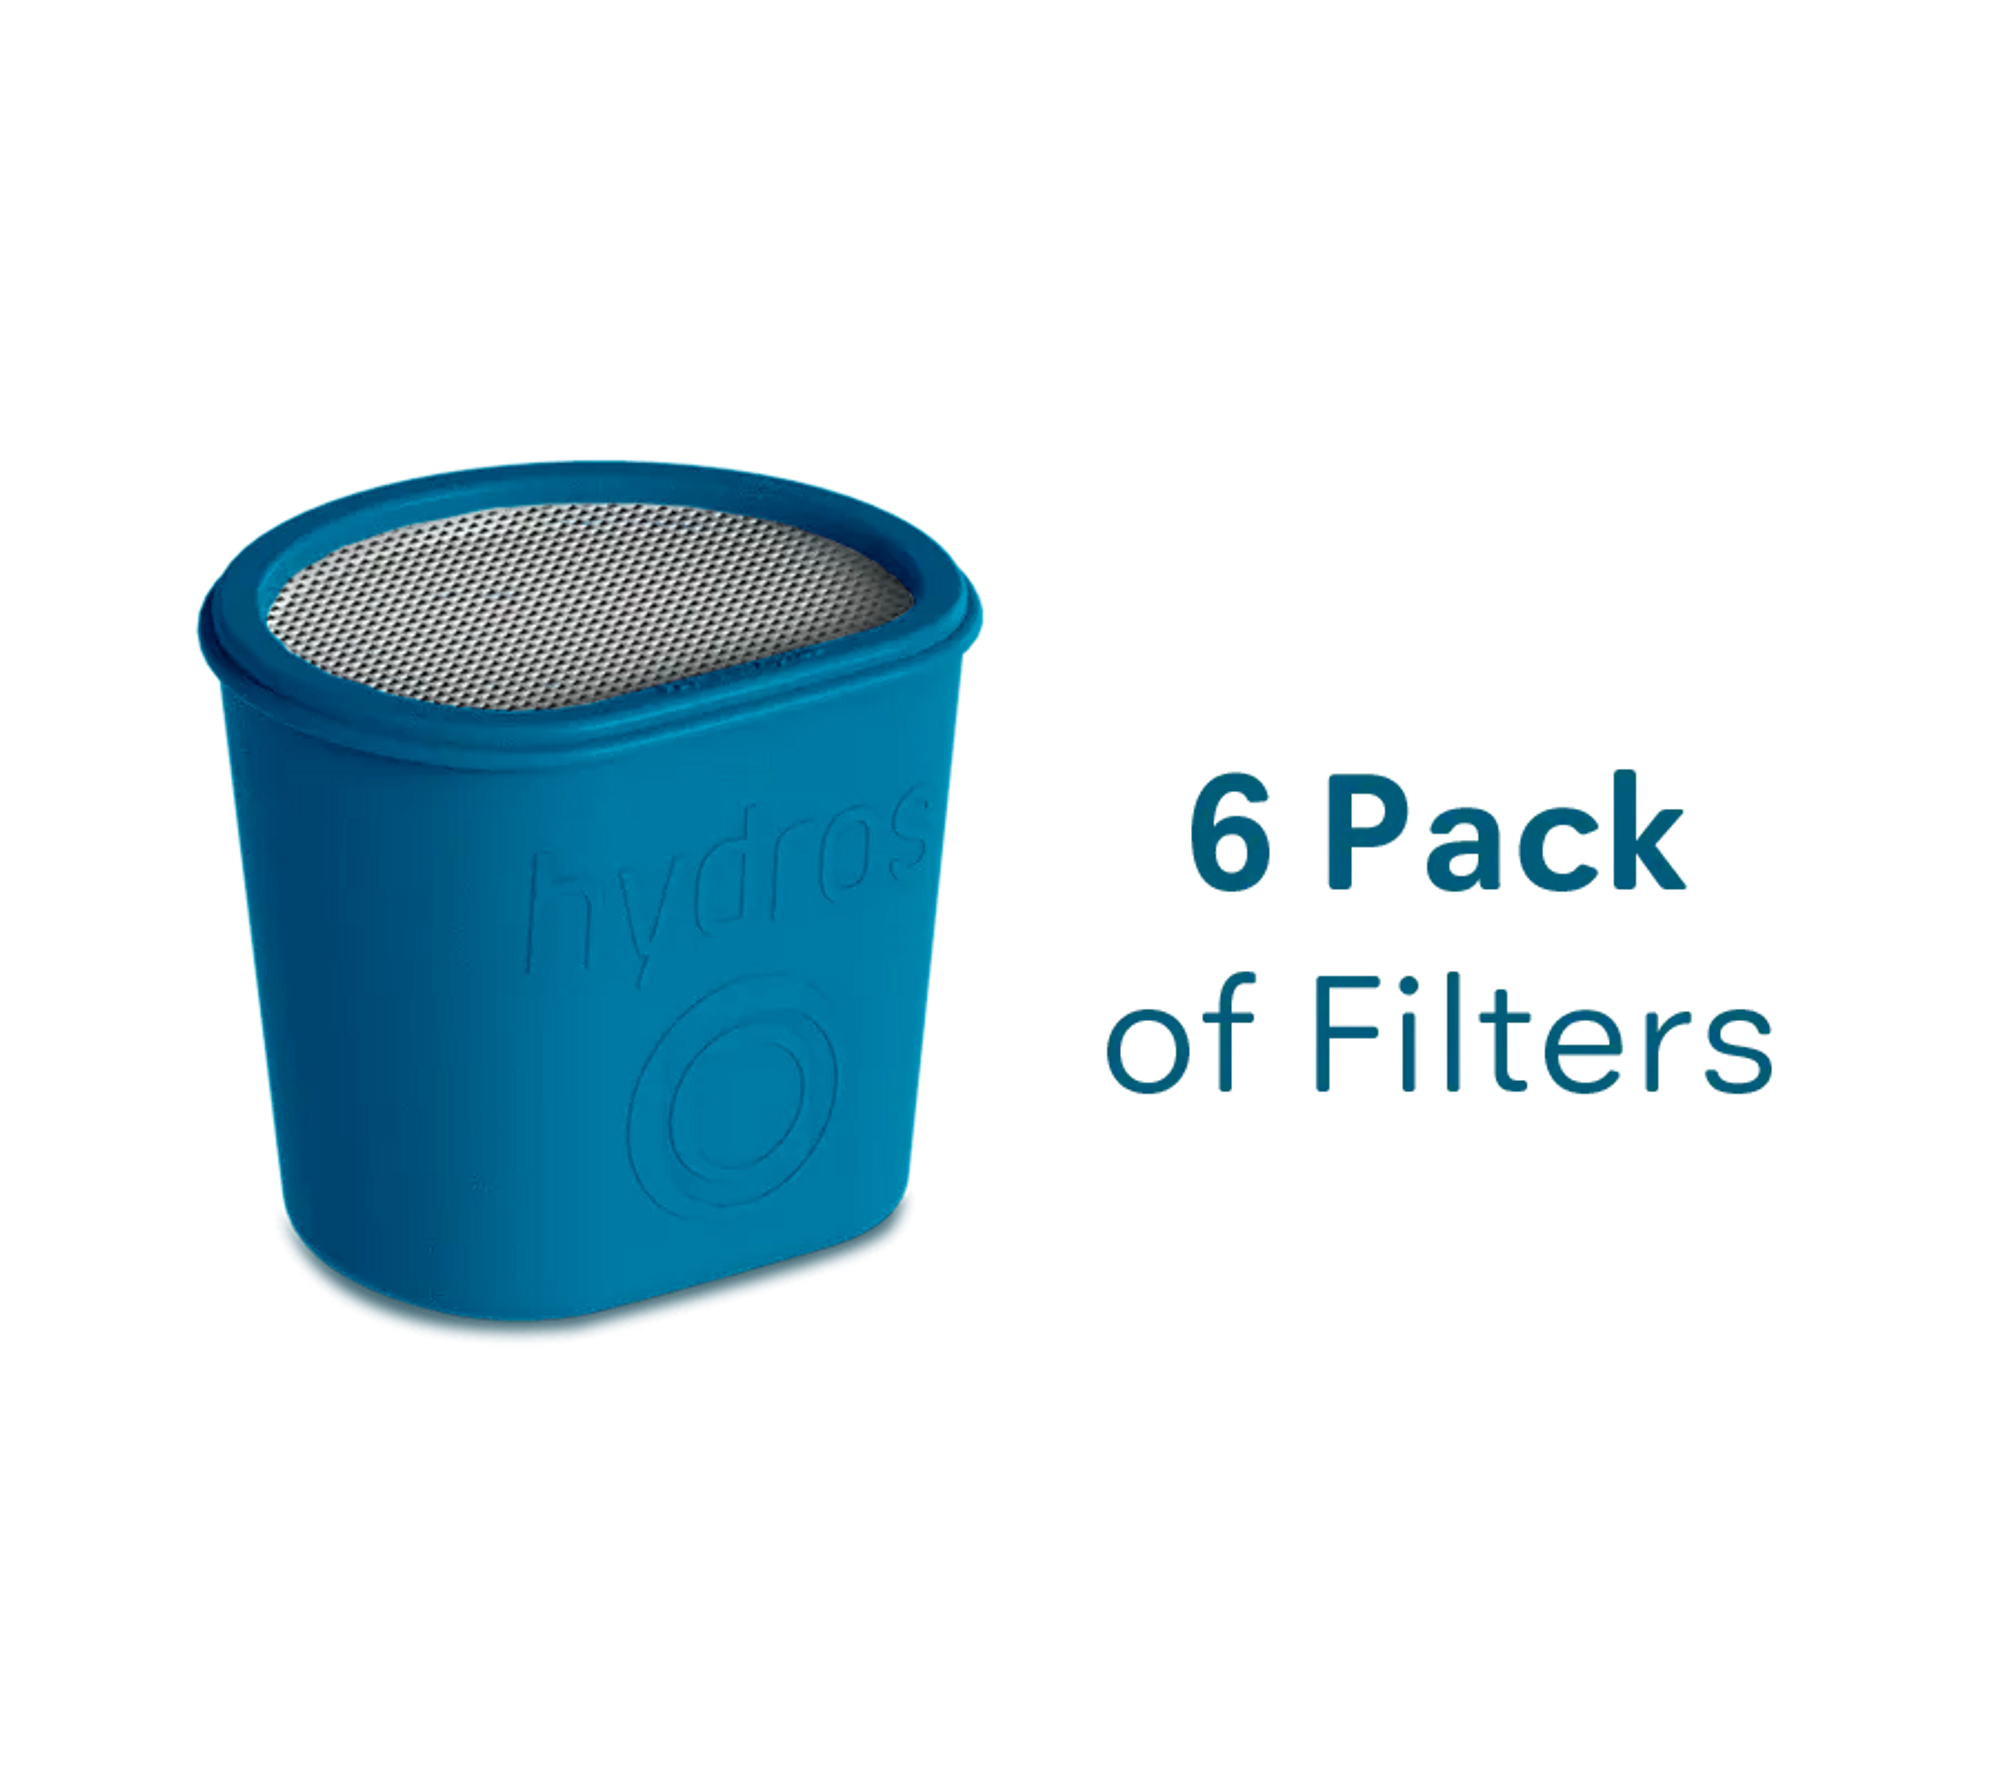 6 Pack of Color Filters